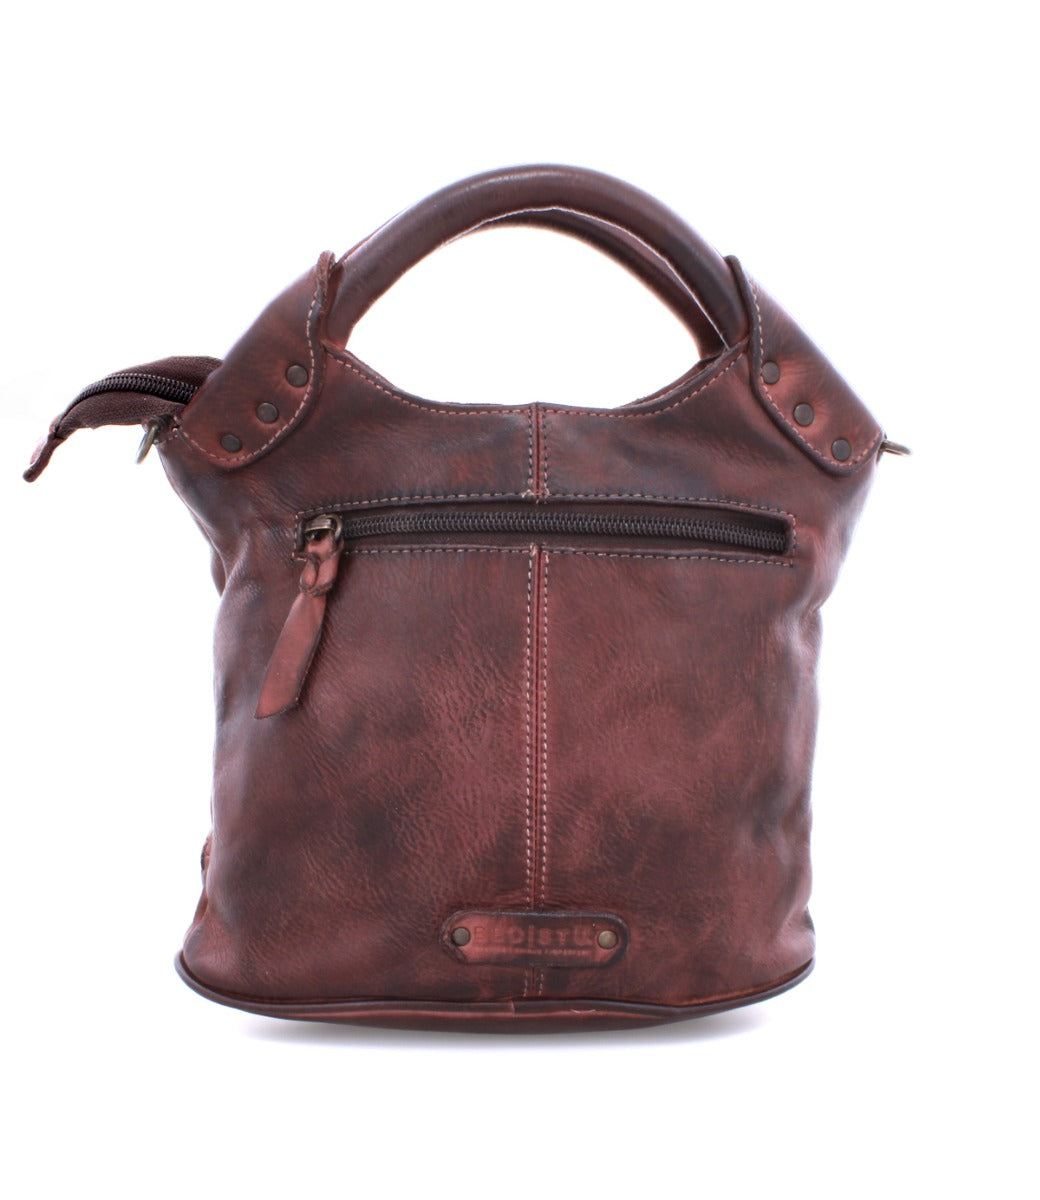 A brown leather Delilah handbag by Bed Stu with two handles and a zipper.